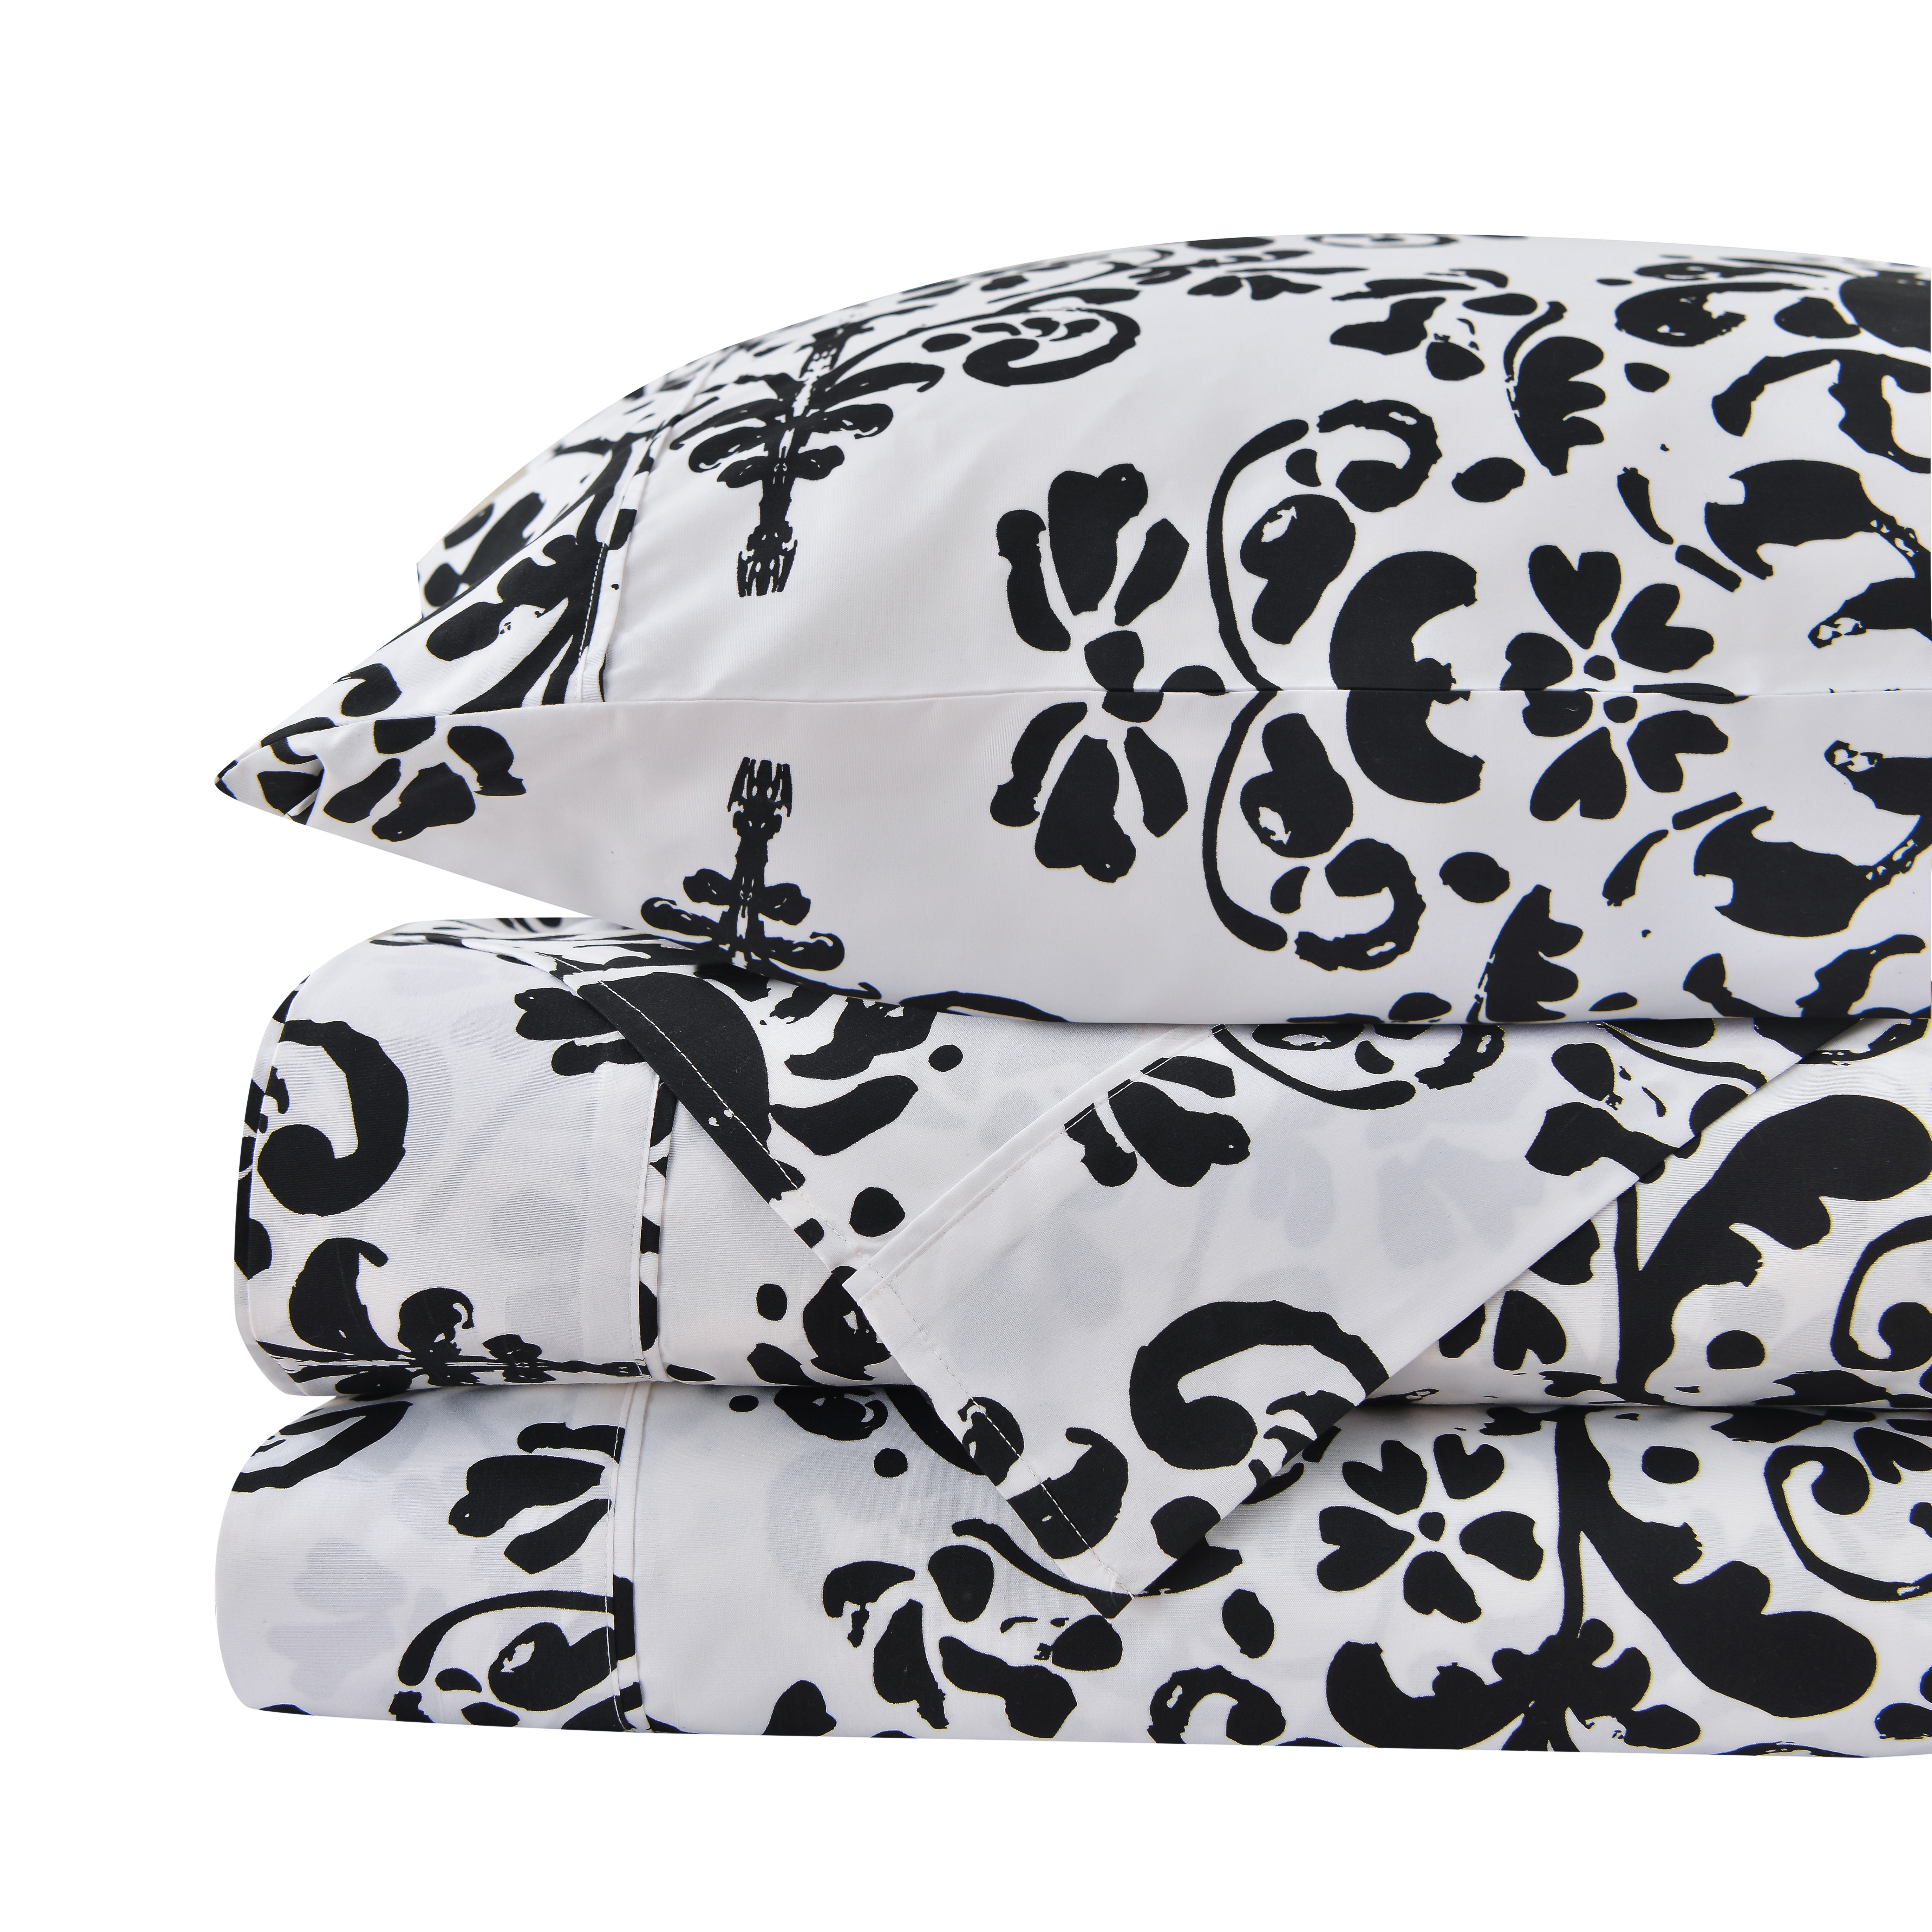 American Home Collection Ultra Soft 4-6 Piece Black & White Damask Bed Sheet Set - King